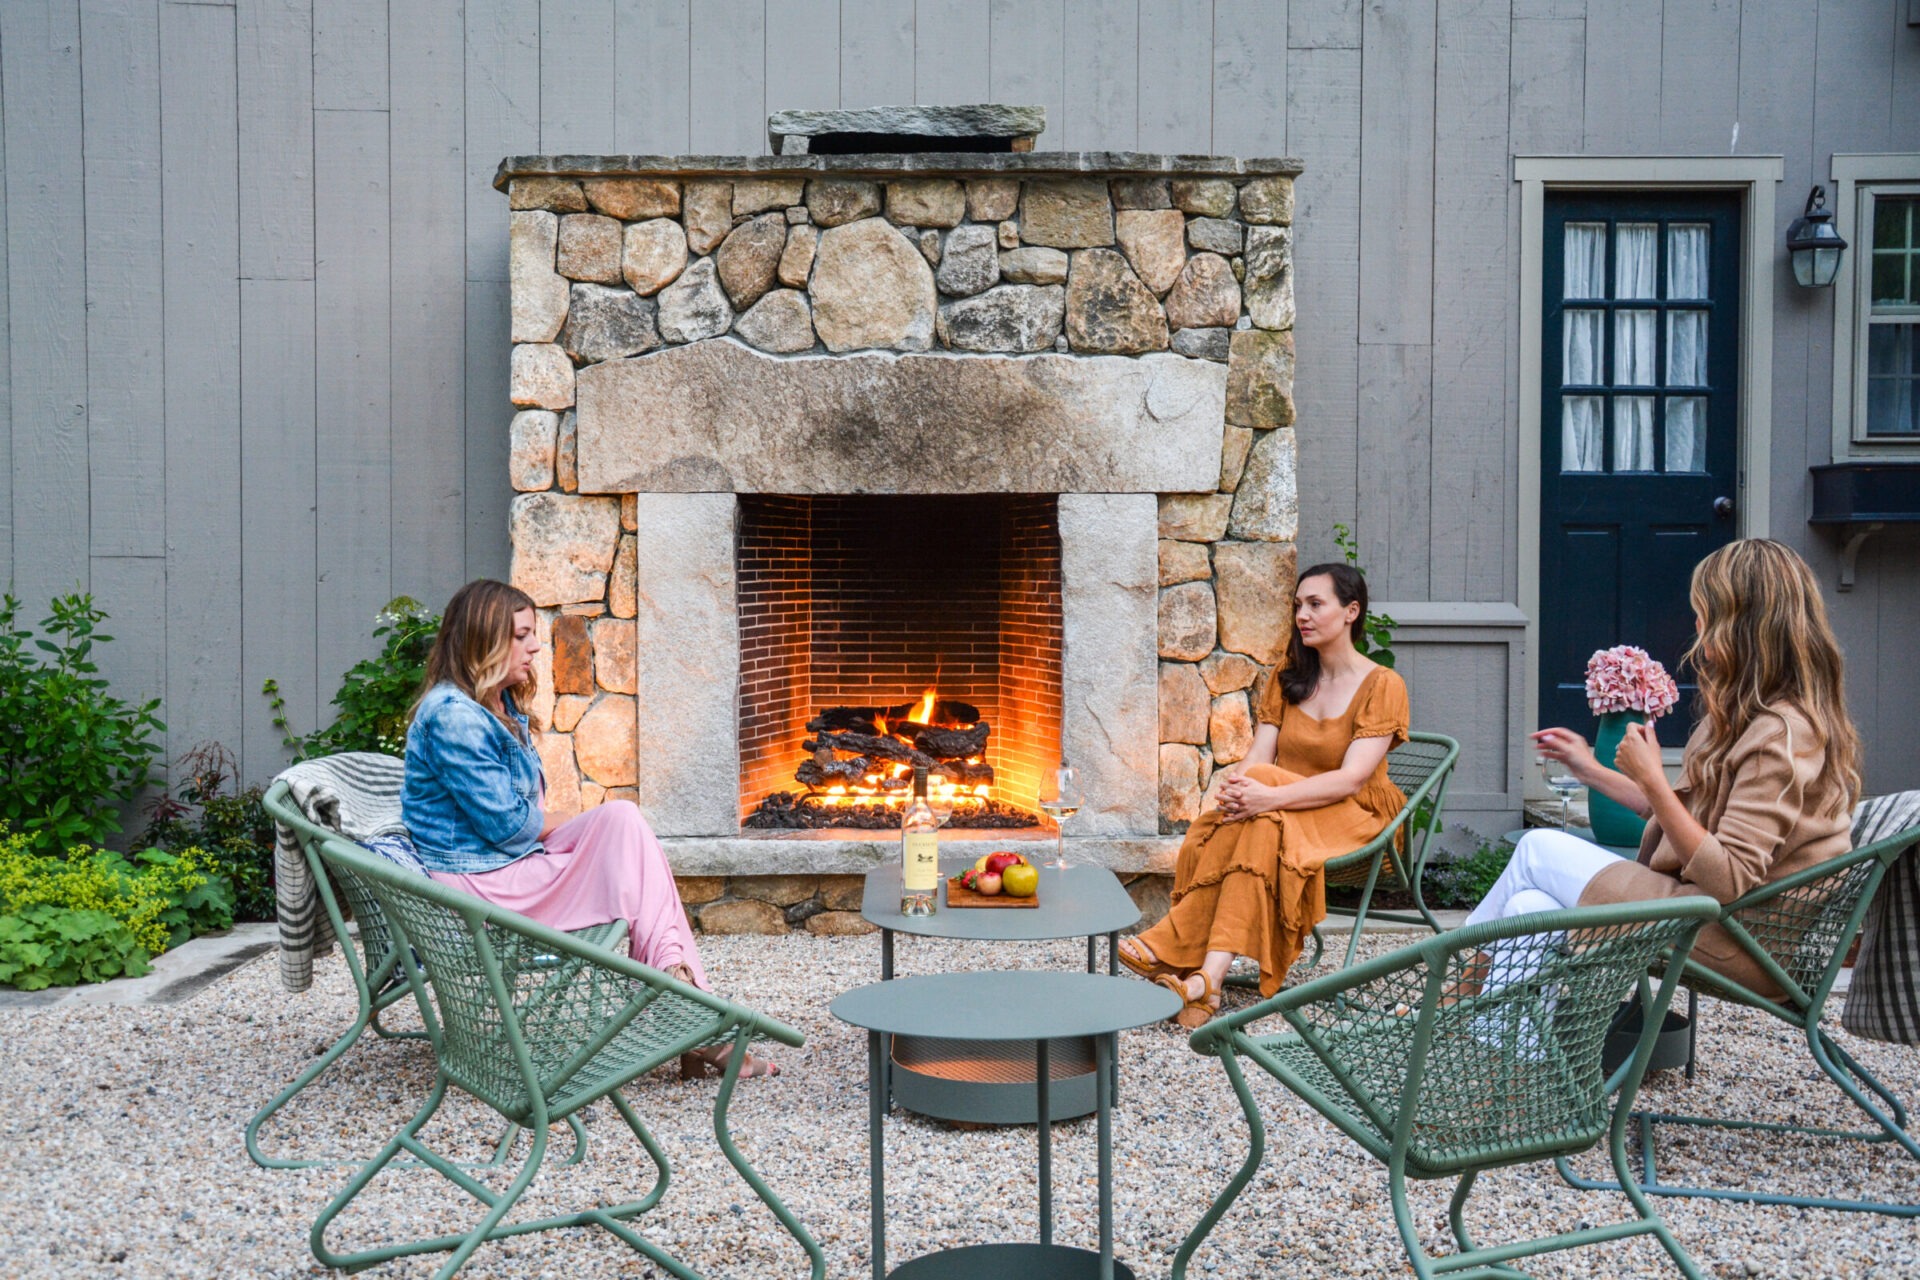 Three people are seated outdoors around a lit fireplace, talking and enjoying each other's company in a cozy, casual backyard setting.